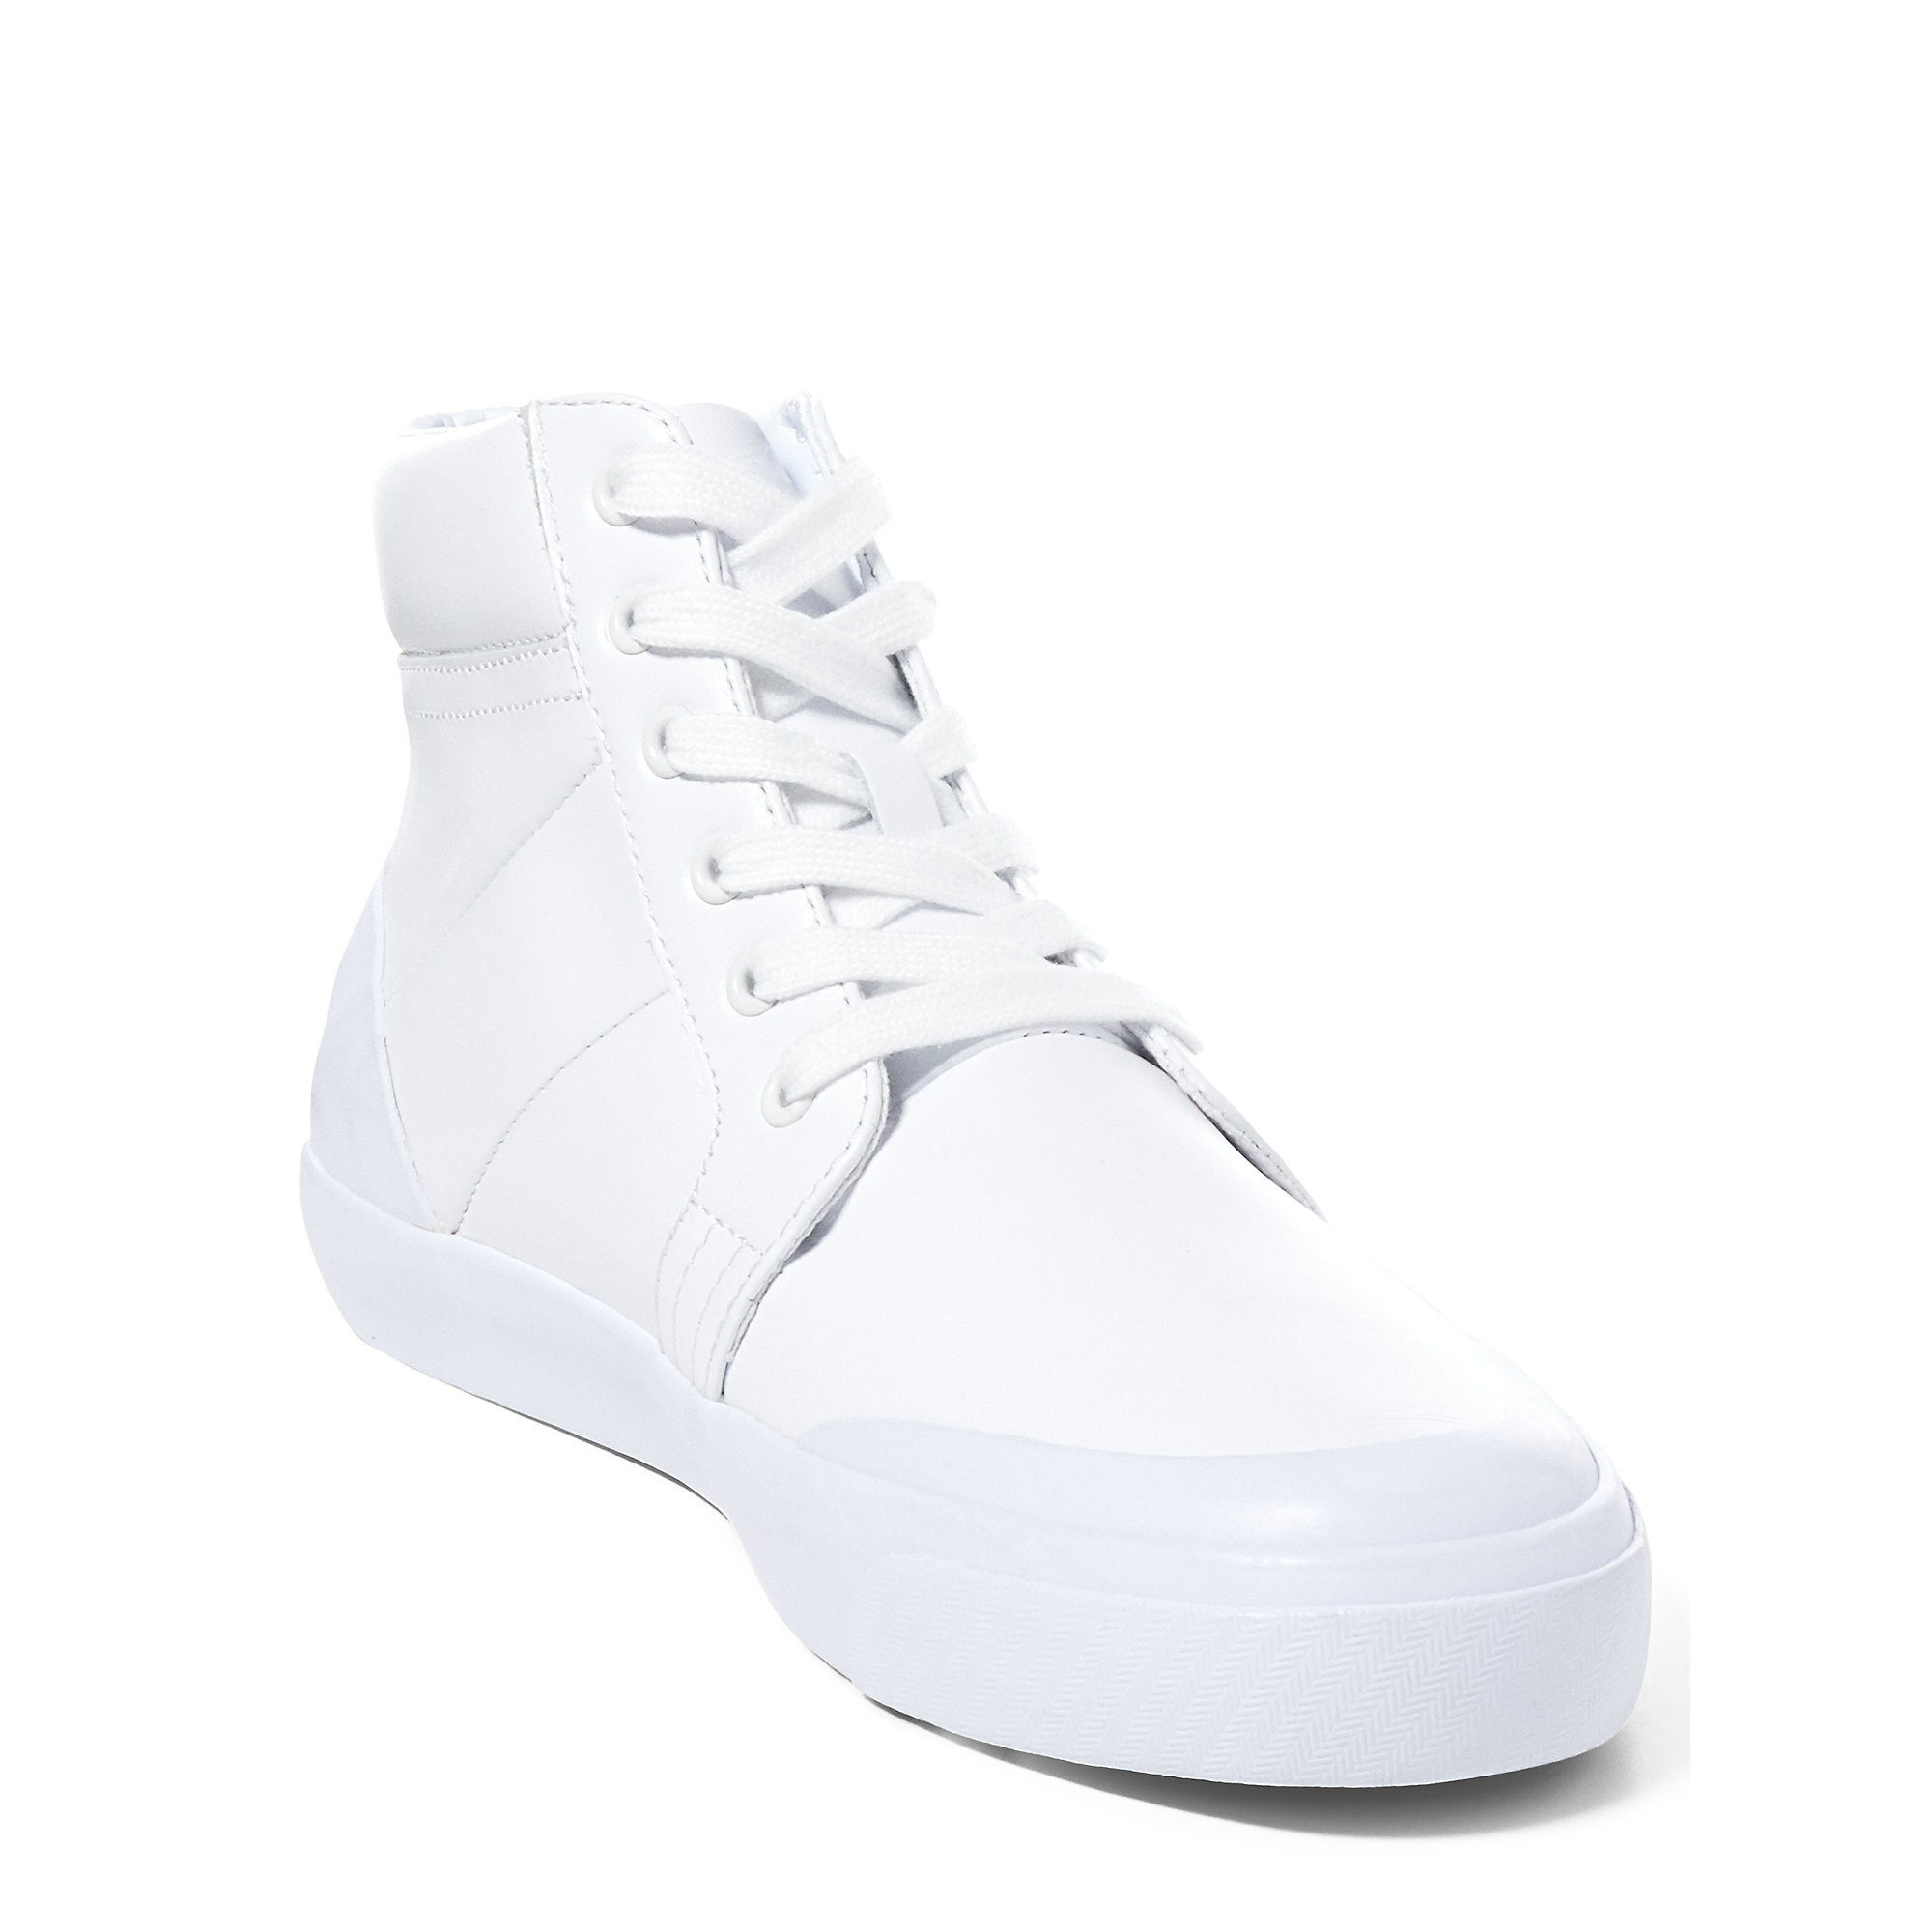 Polo Ralph Lauren Isaak Leather High-top Sneaker in White - Lyst